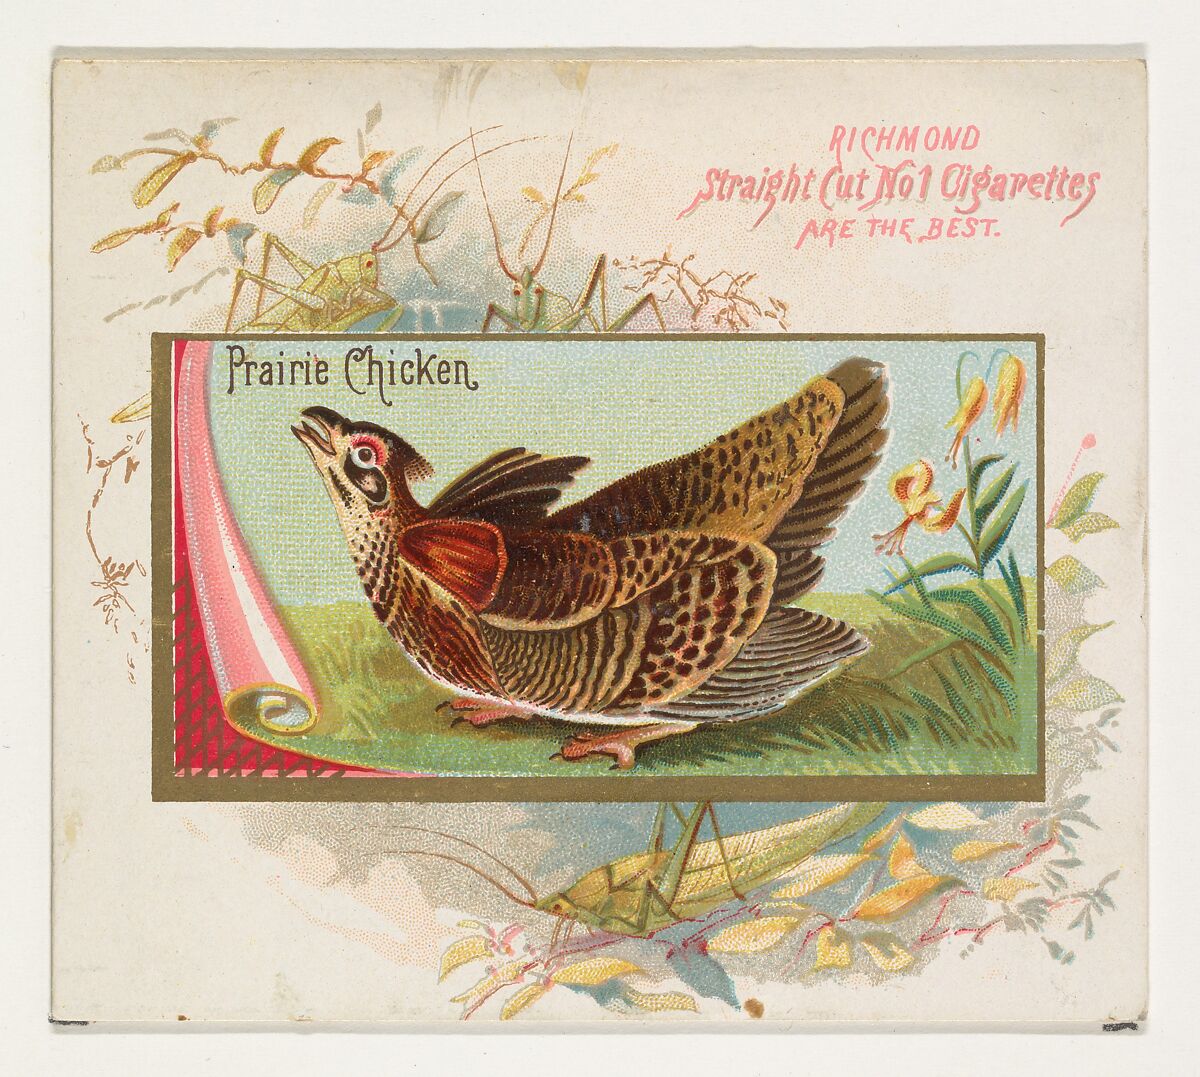 Prairie Chicken, from the Game Birds series (N40) for Allen & Ginter Cigarettes, Issued by Allen &amp; Ginter (American, Richmond, Virginia), Commercial color lithograph 